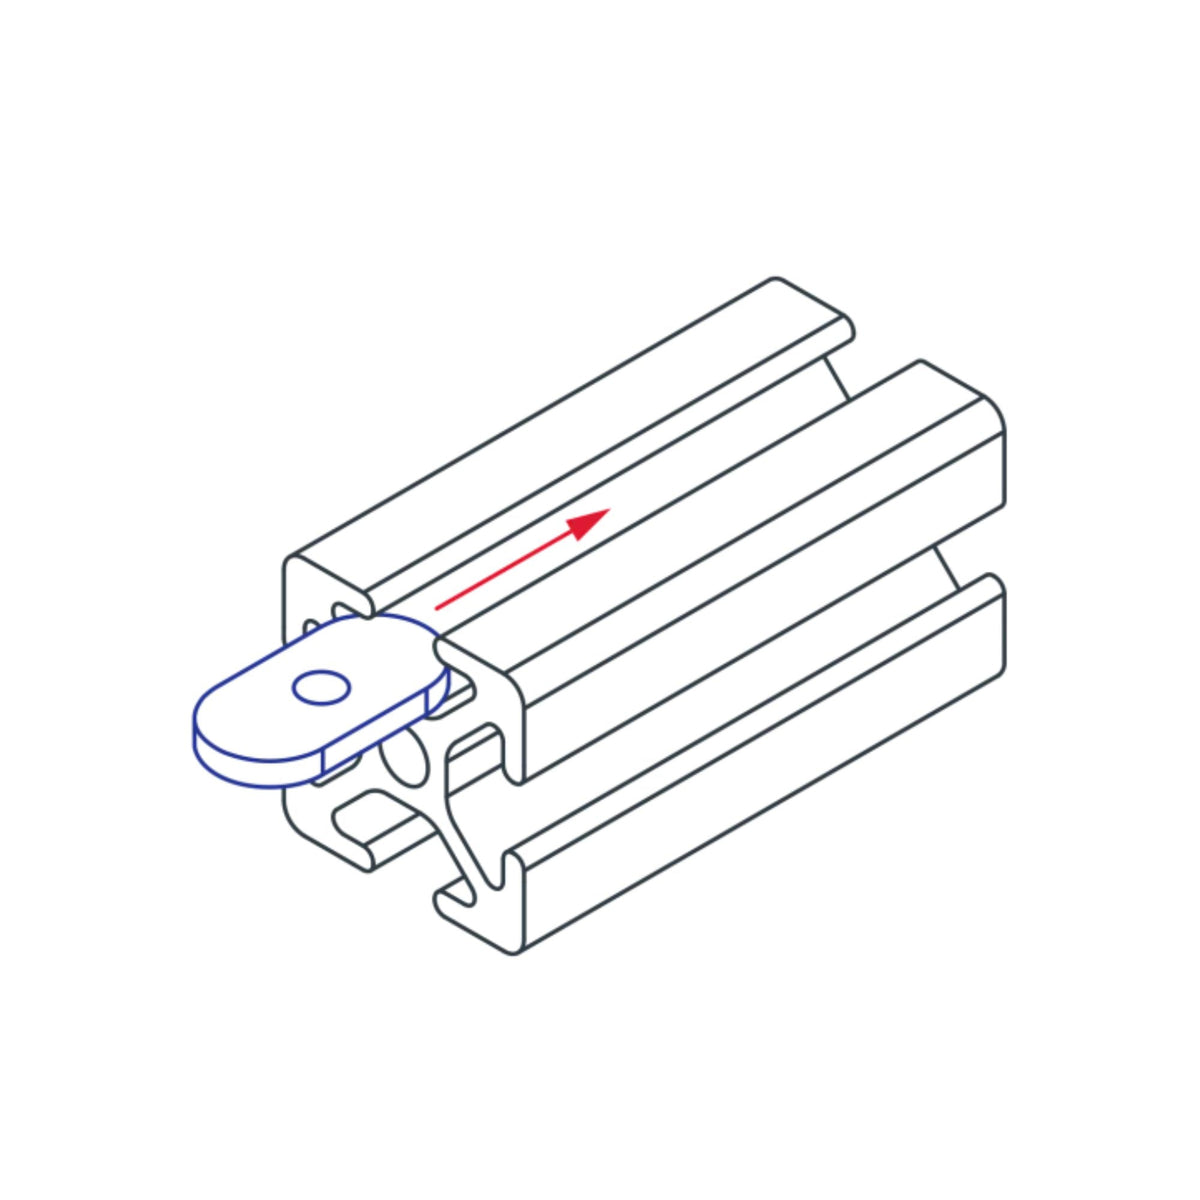 diagram of a t-nut being inserted into the t-slot of a metal bar